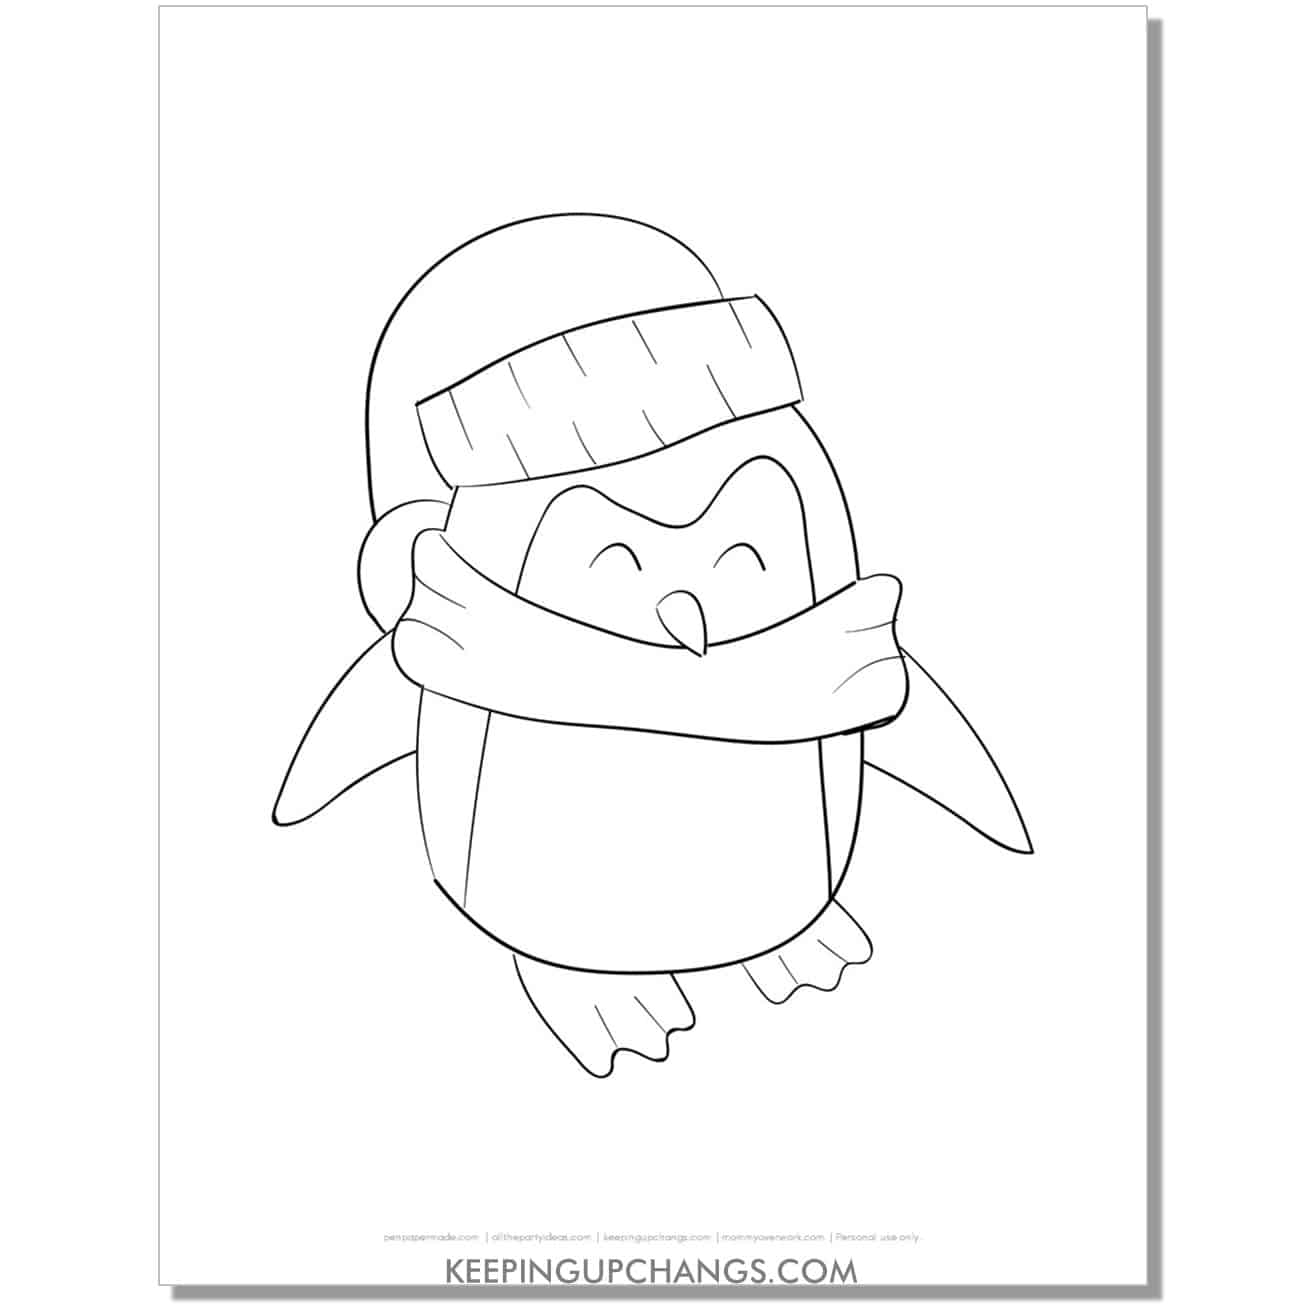 free simple penguin hand drawing with scarf, hat coloring page.